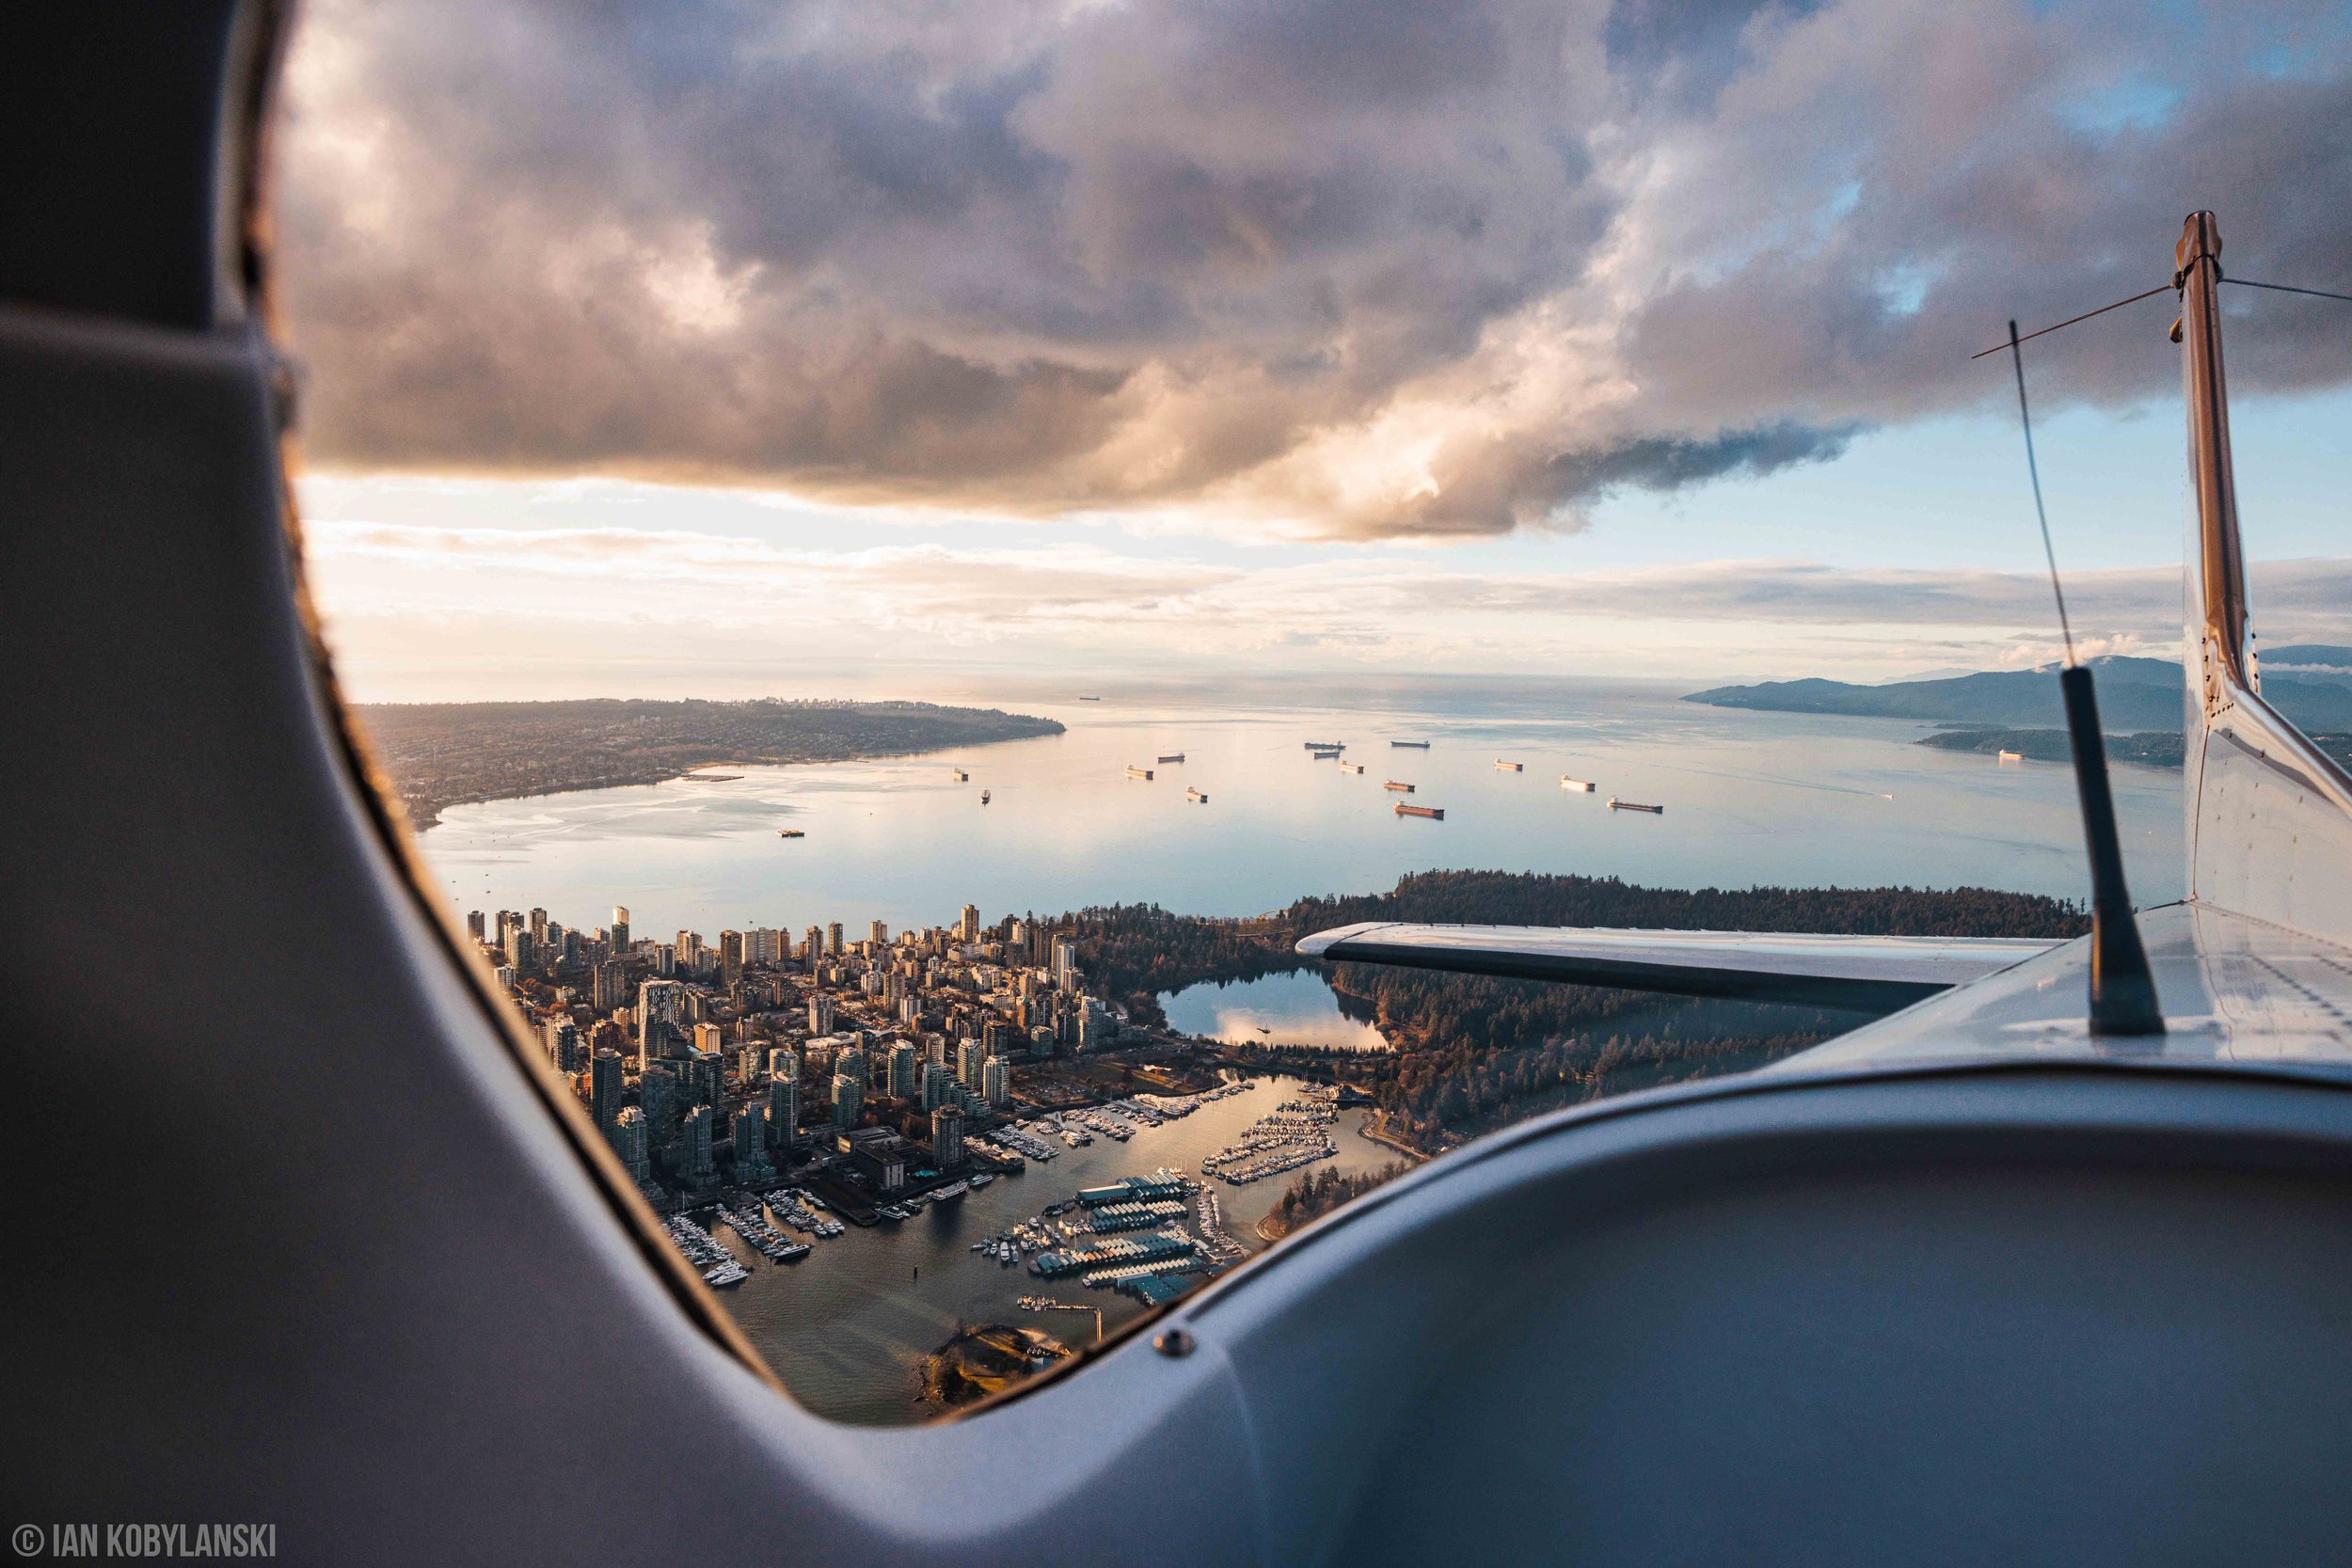   "Home Sweet Home” . Stanley Park and the Coal Harbour skyline from the rear window of an airplane.  Available as a fine art print here . 